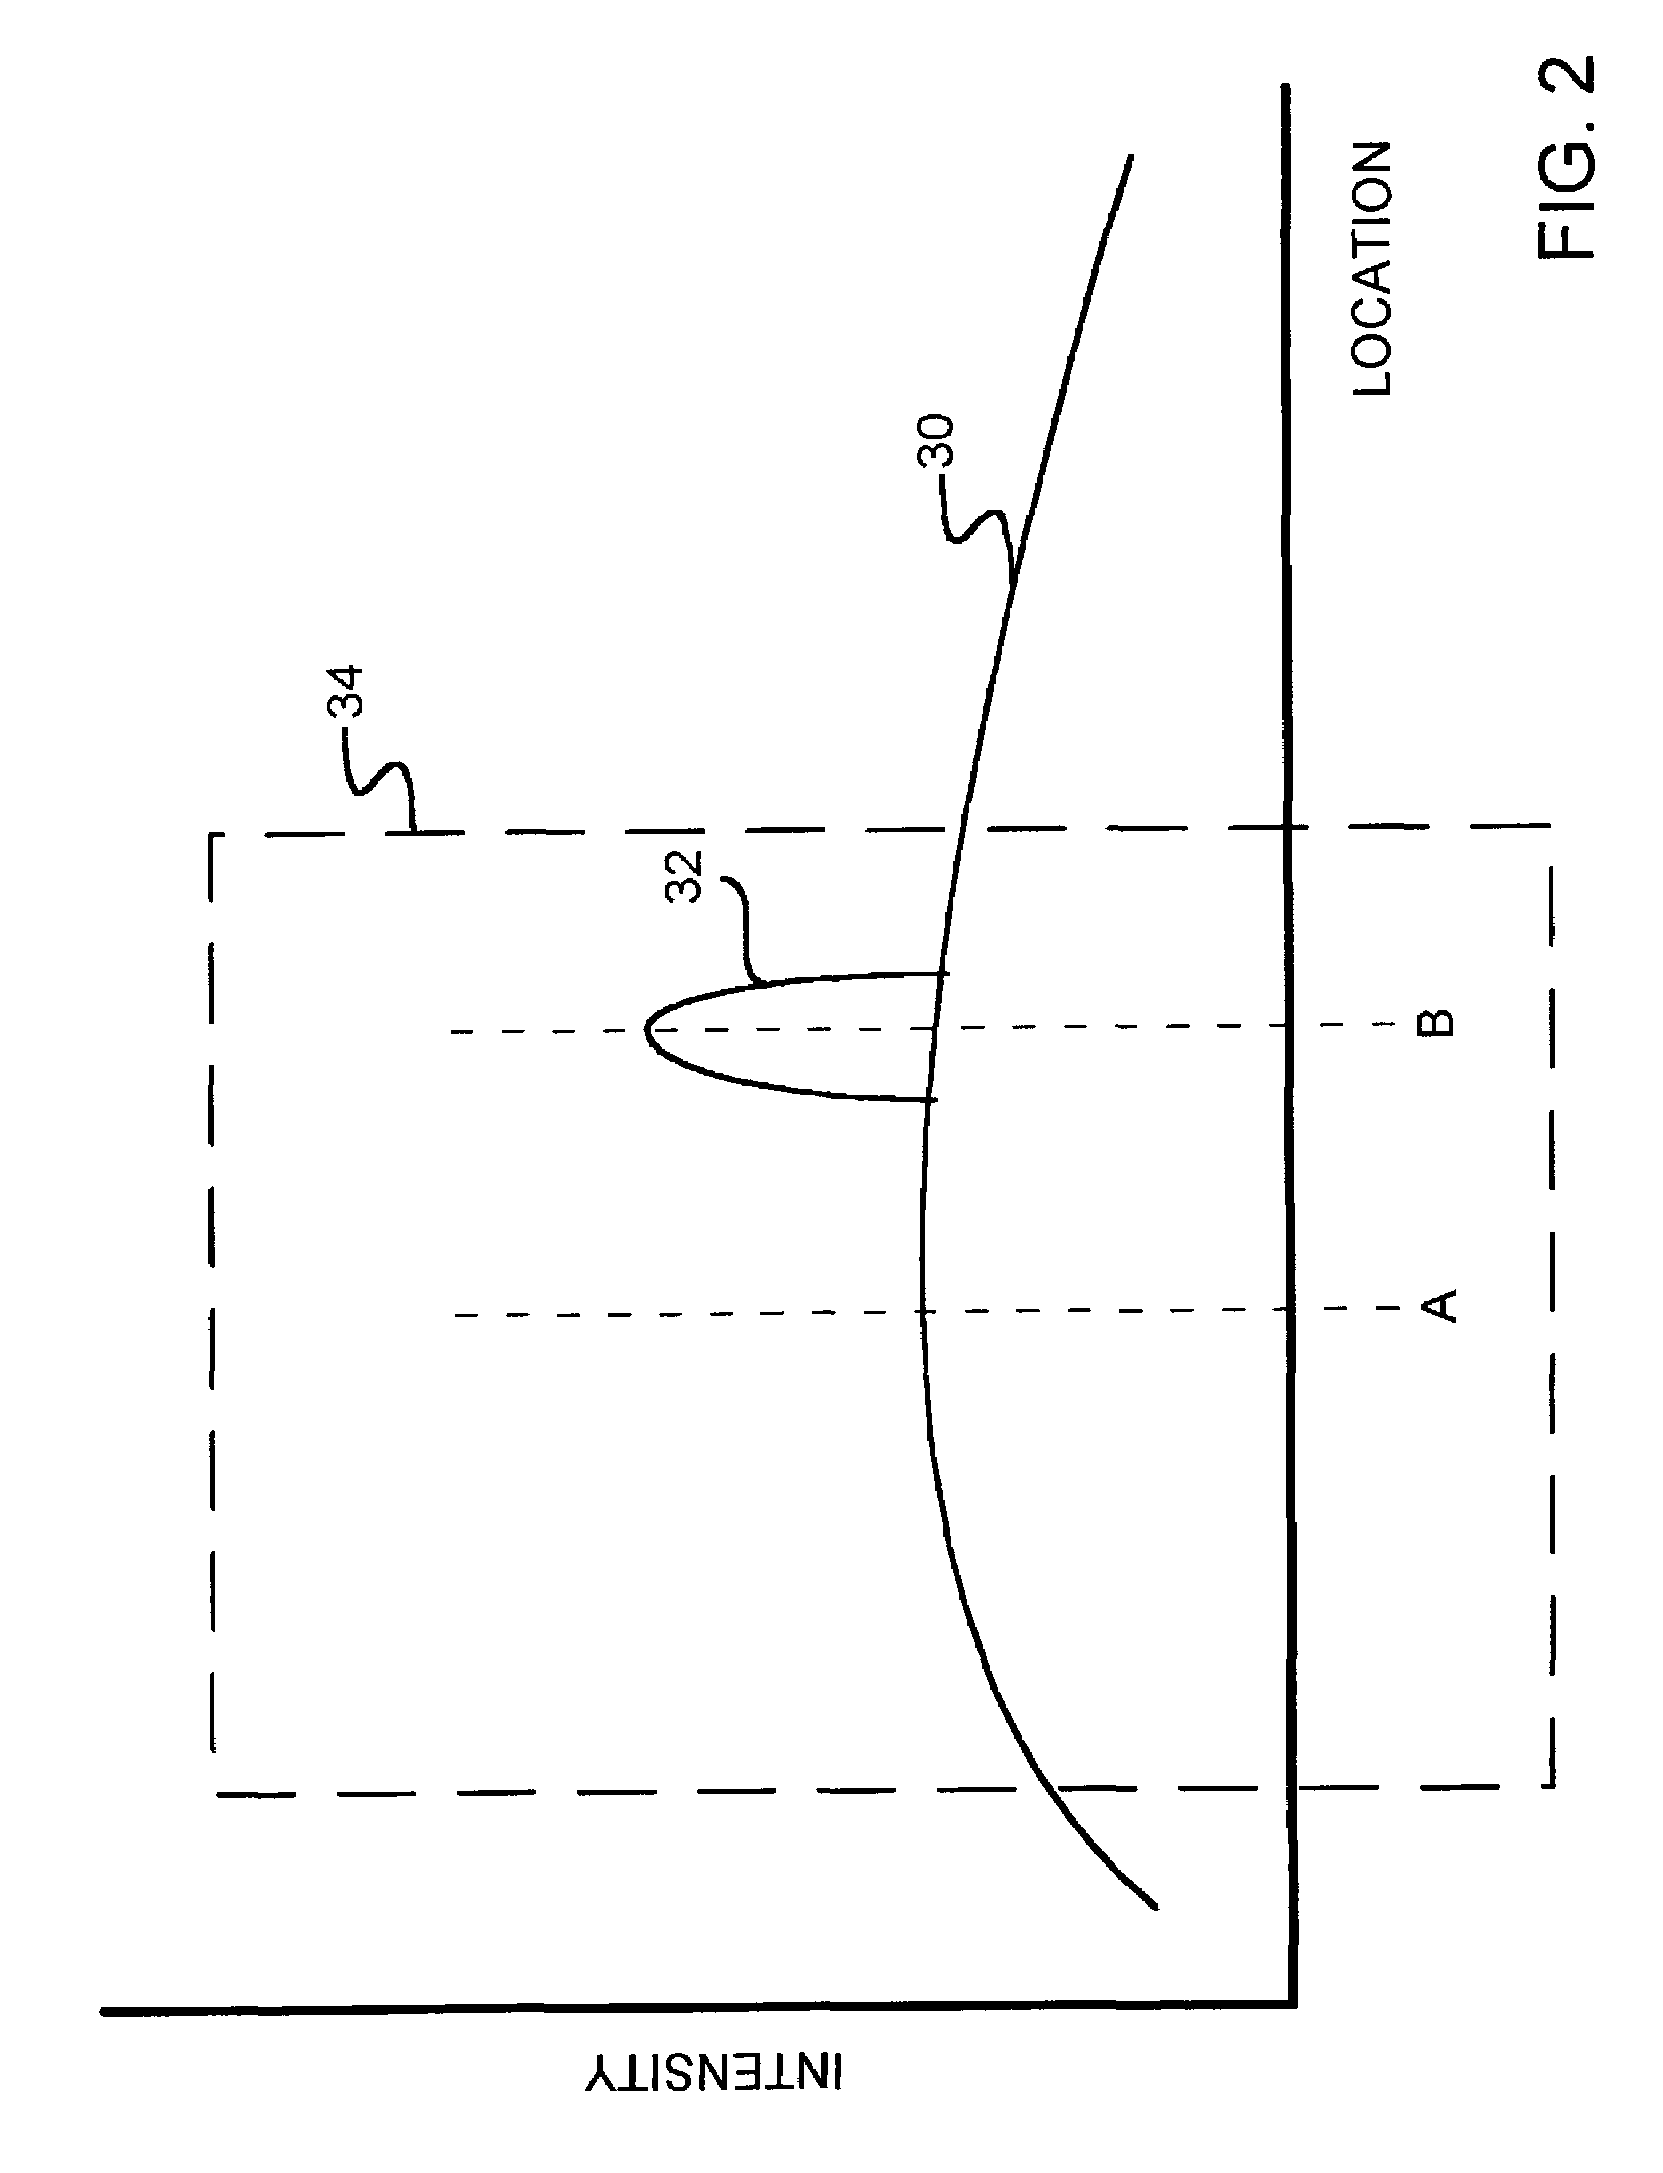 System and method of light spot position and color detection